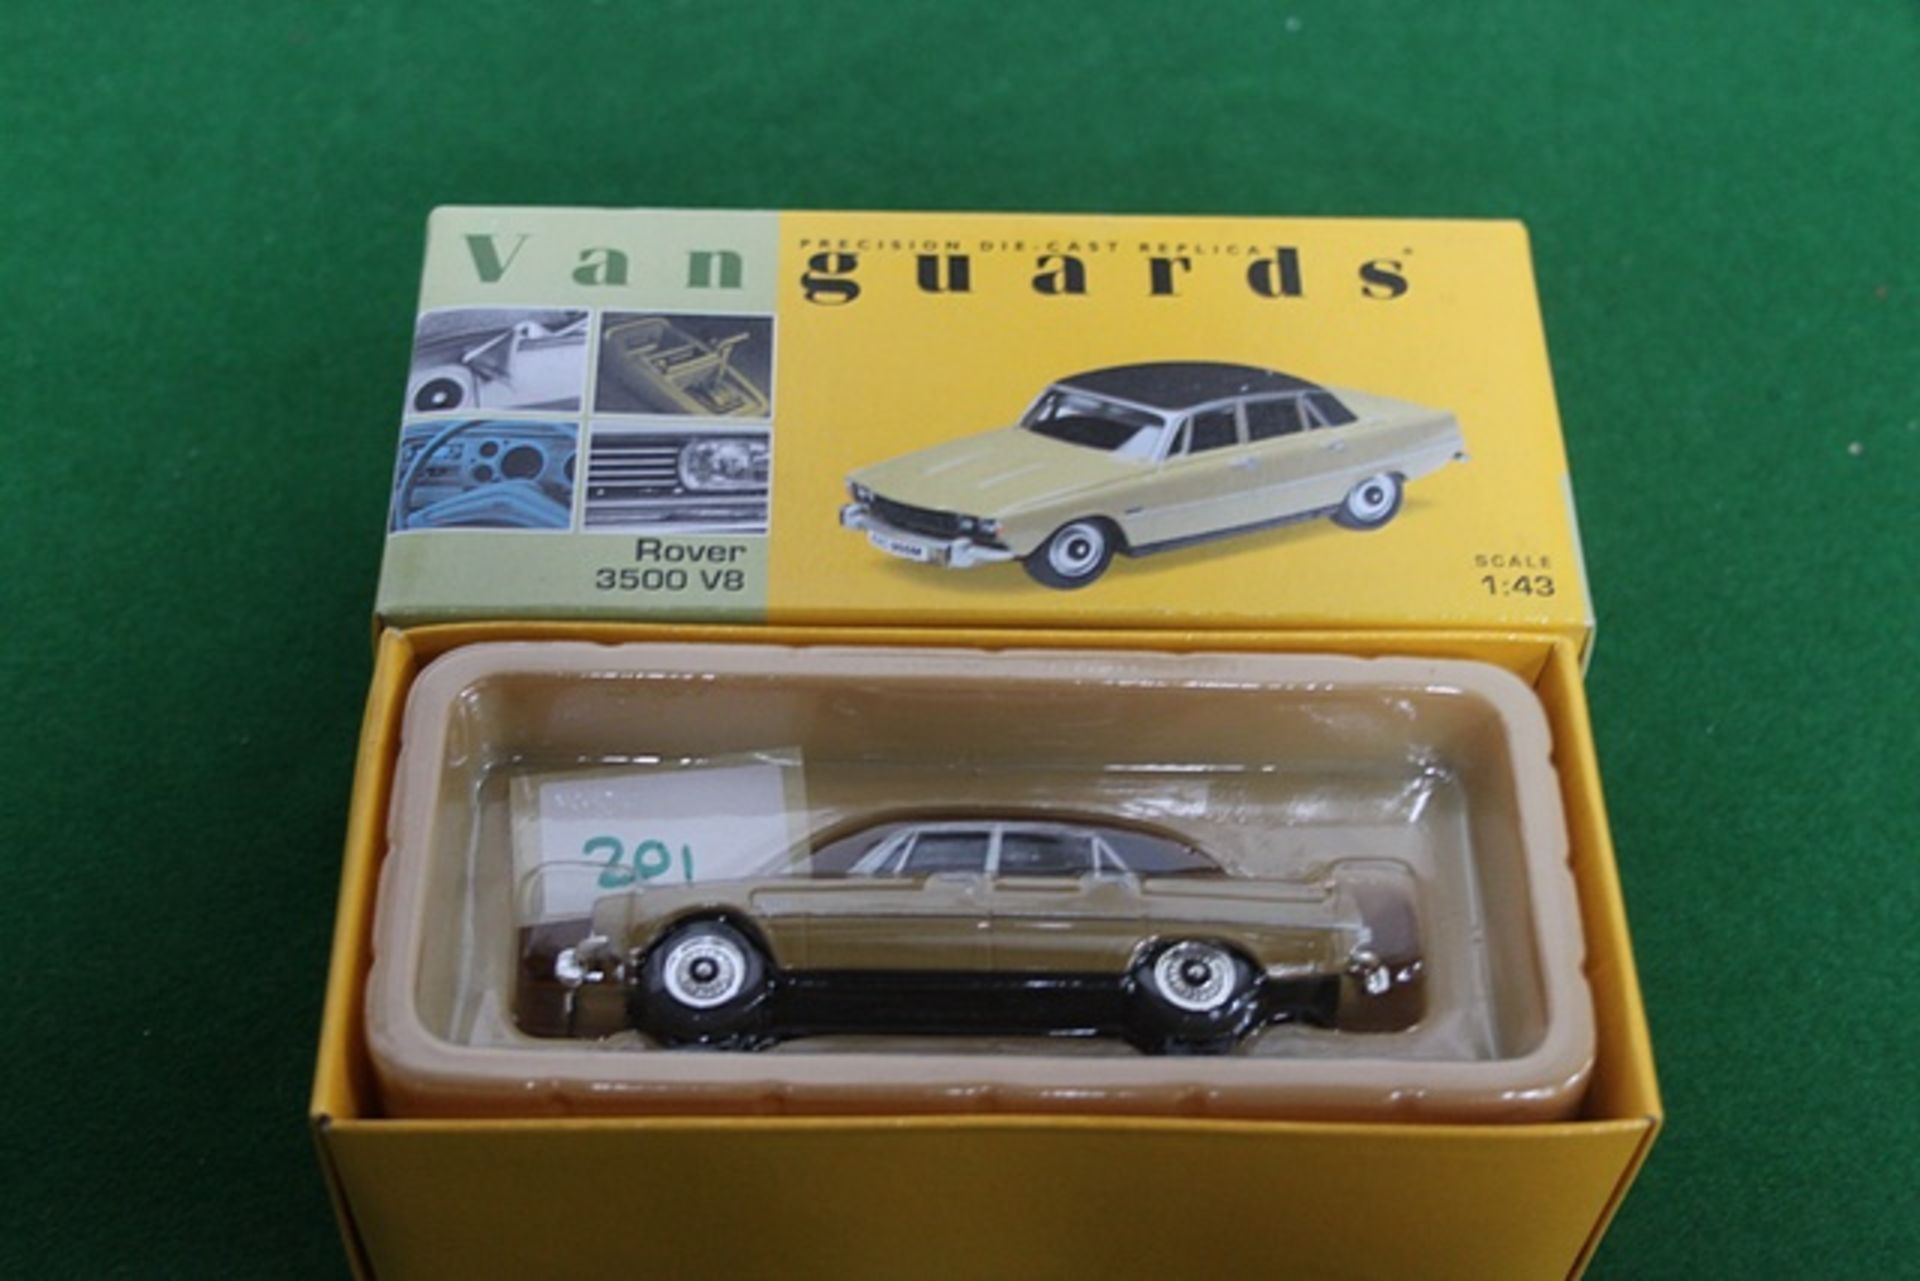 Vanguards # VA06500 Diecast Rover 3500 V8 In Almond Scale 1/43 Complete With Box - Image 3 of 3